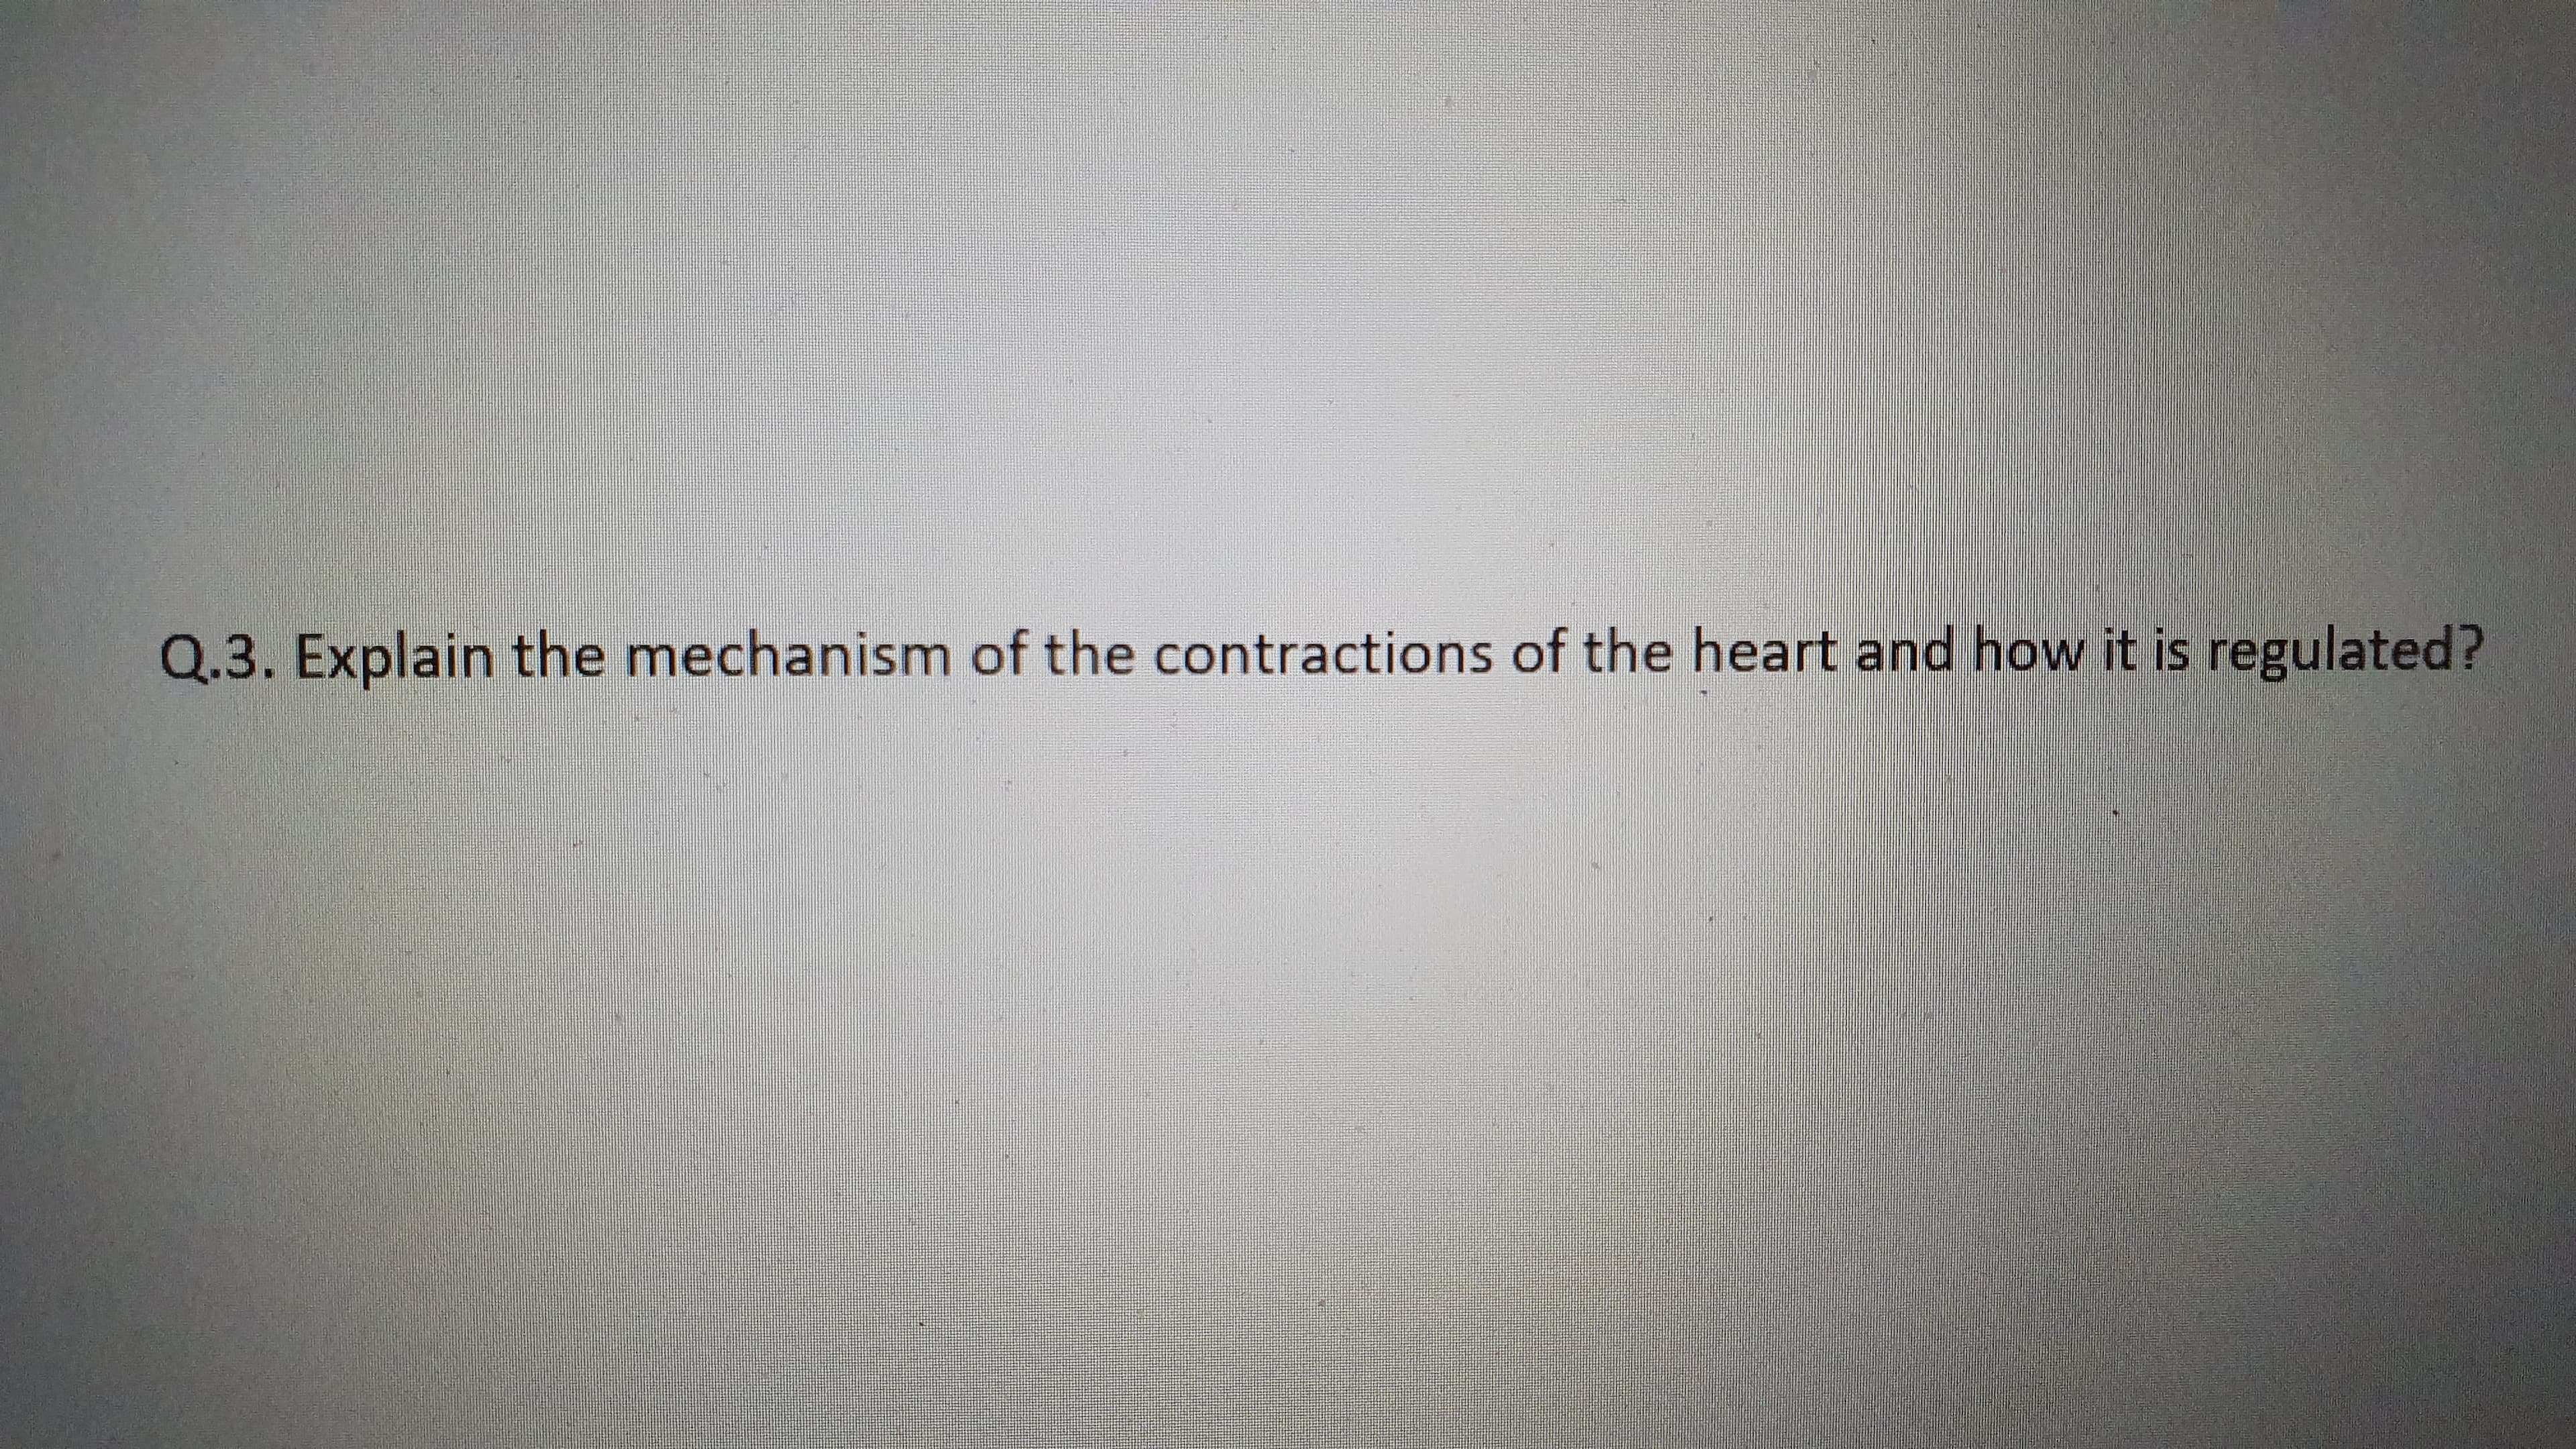 Explain the mechanism of the contractions of the heart and how it is regulated?
